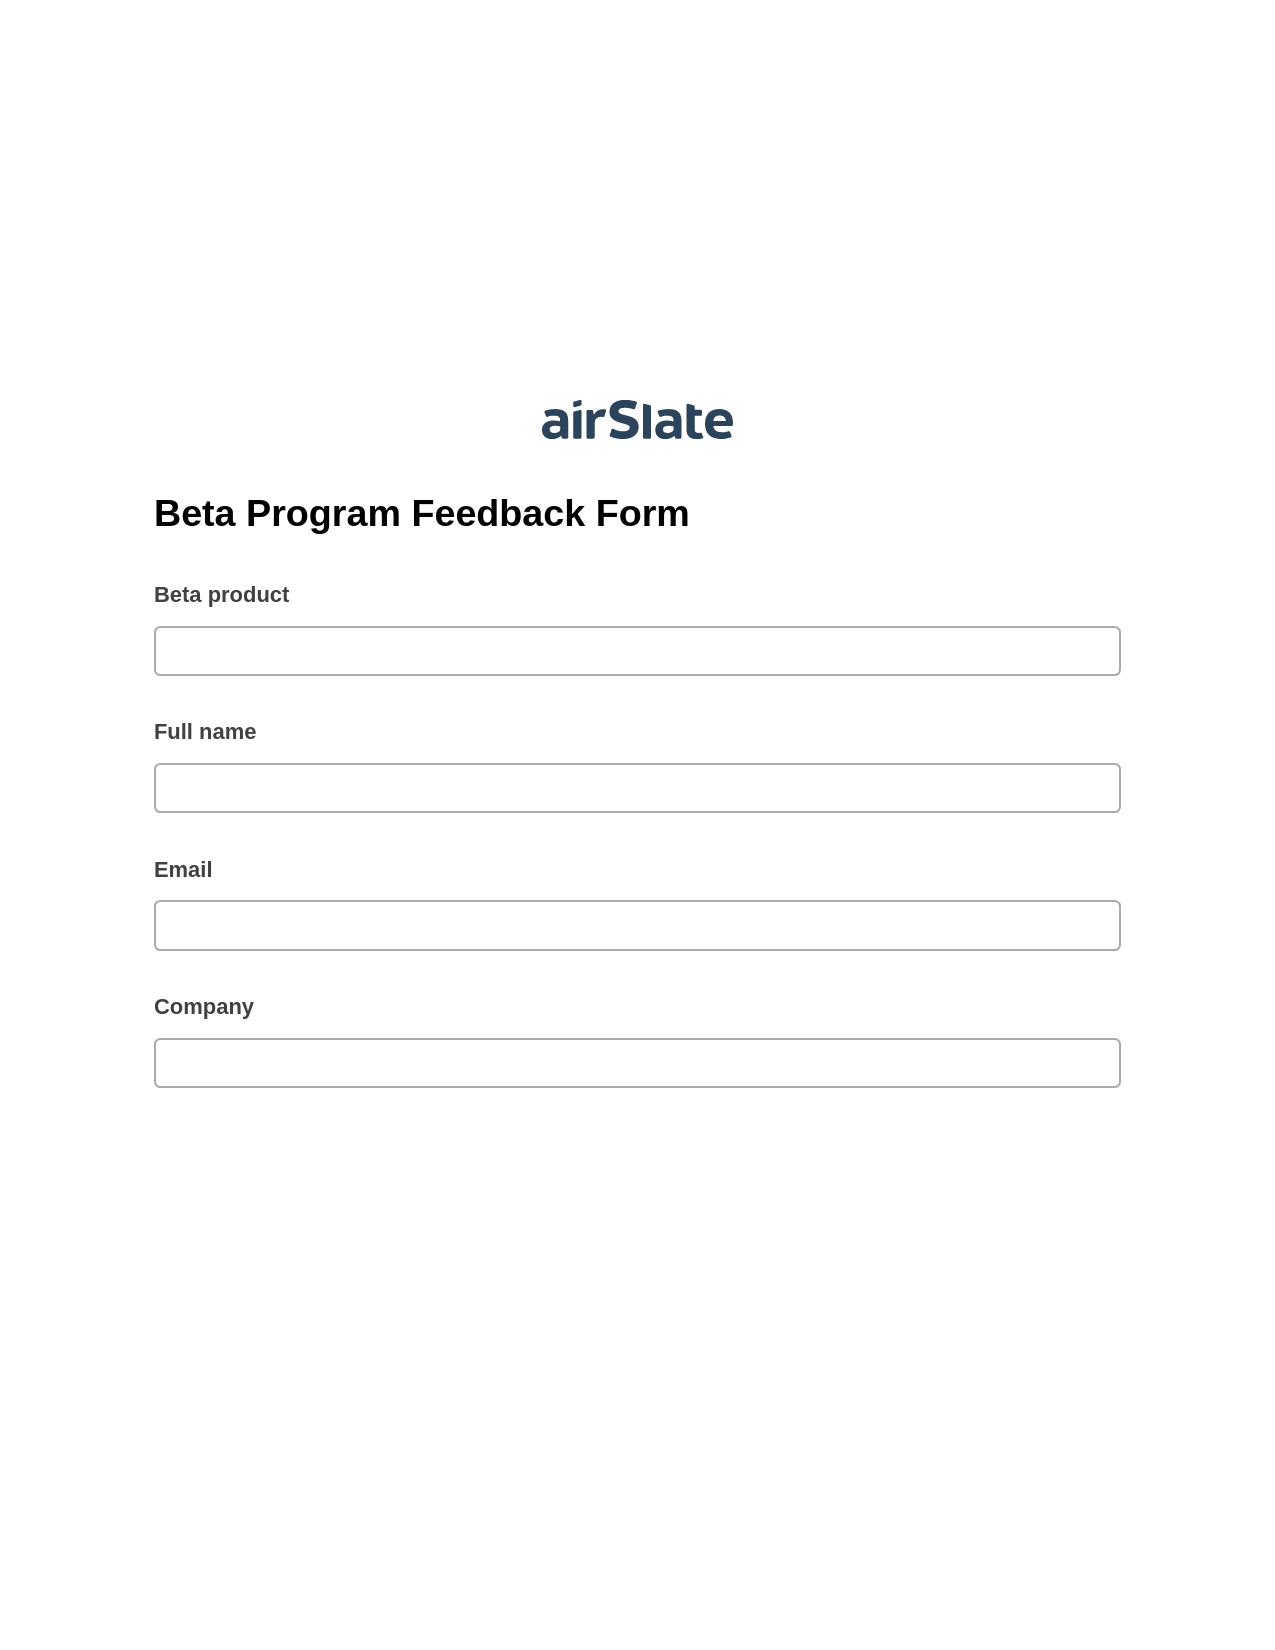 Multirole Beta Program Feedback Form Pre-fill from NetSuite Records Bot, Roles Reminder Bot, Export to Excel 365 Bot